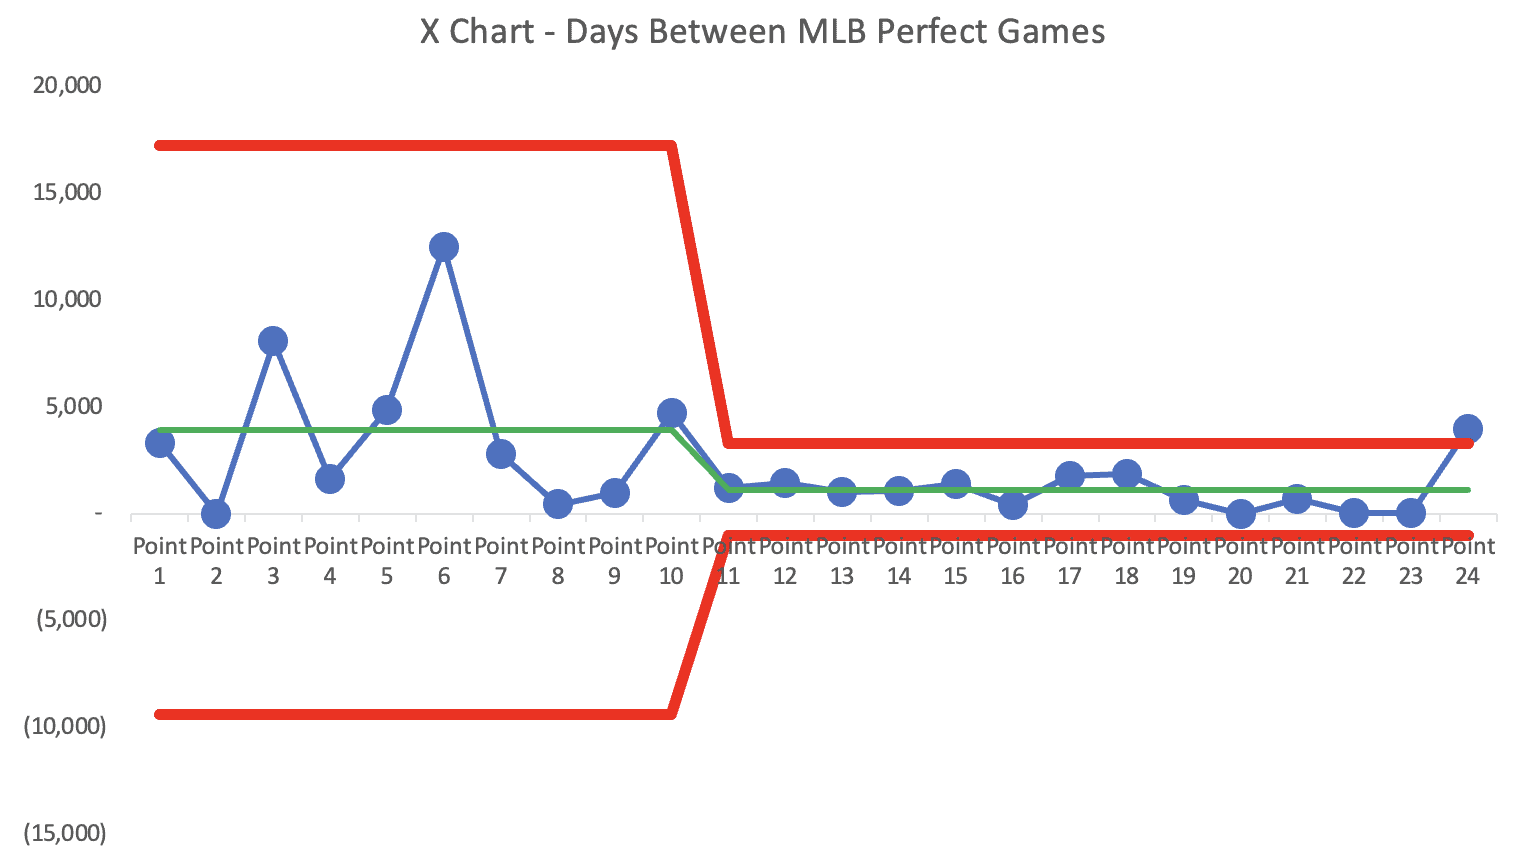 X Chart - Days between MLB Perfect Games with shift